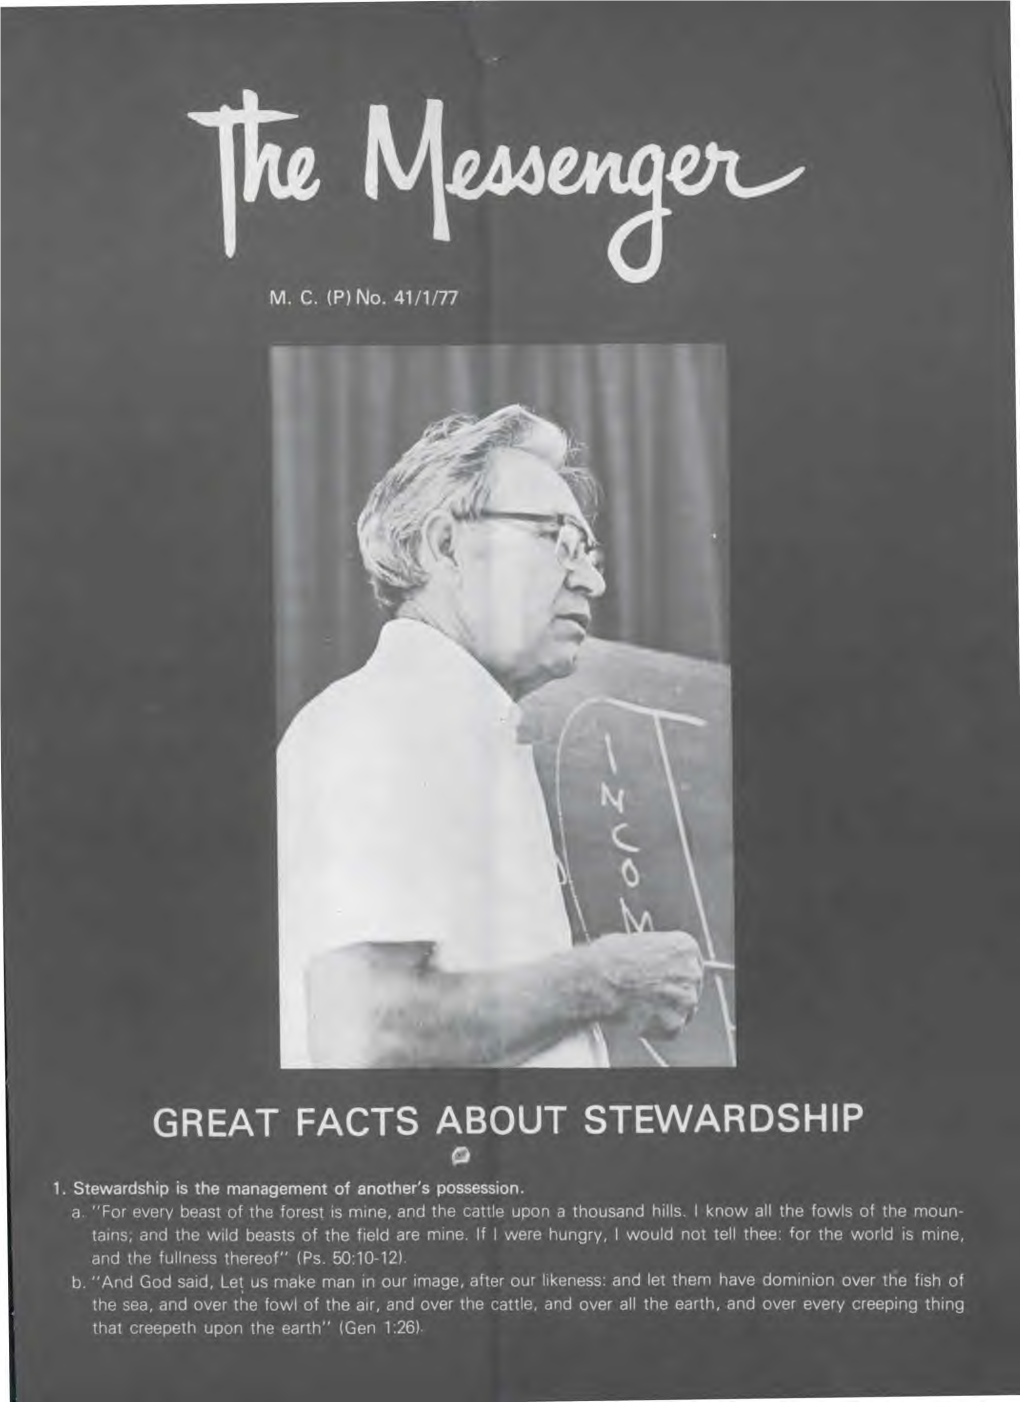 Great Facts About Stewardship